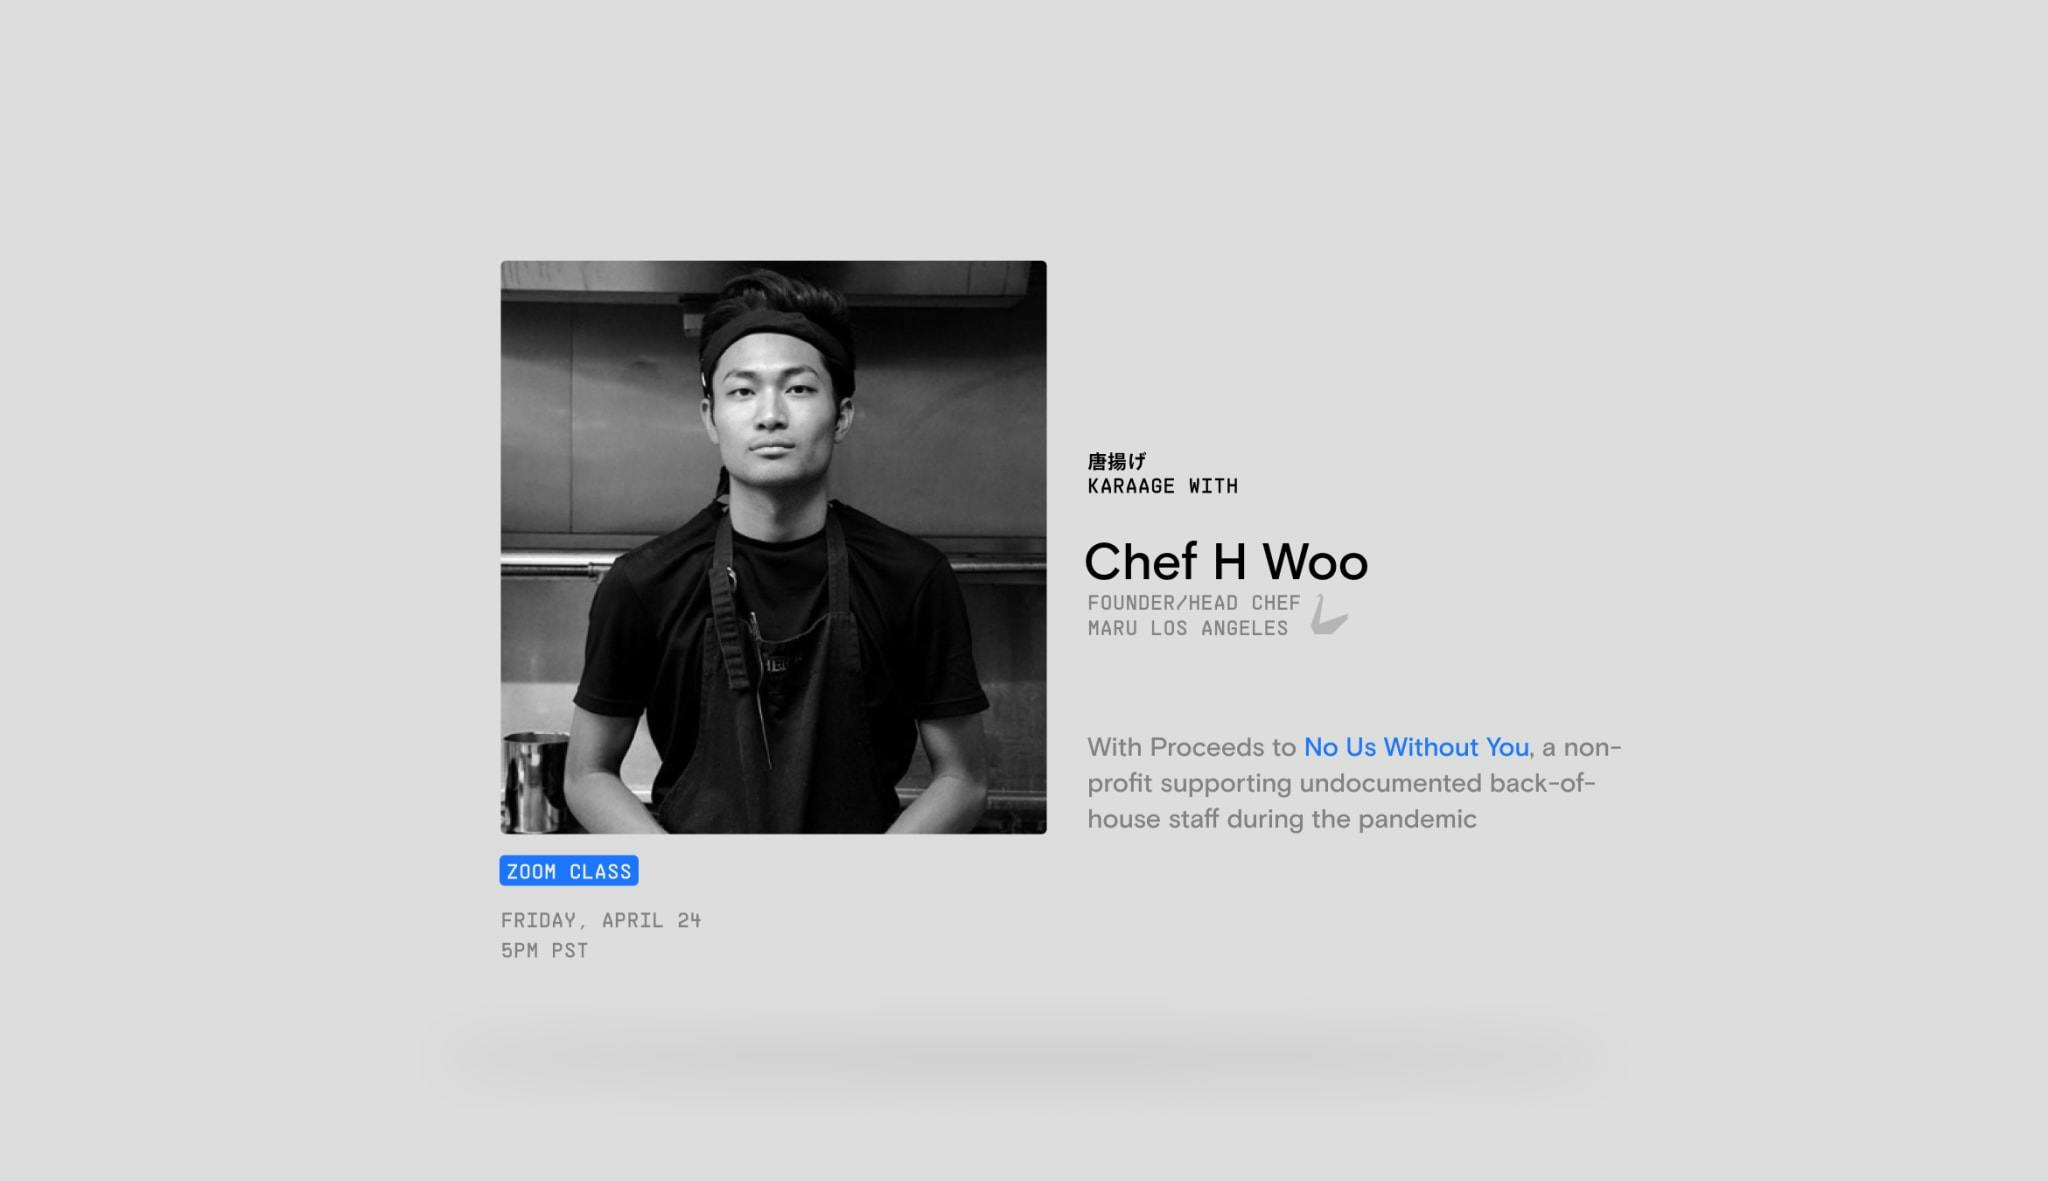 An event flyer with chef HWoo